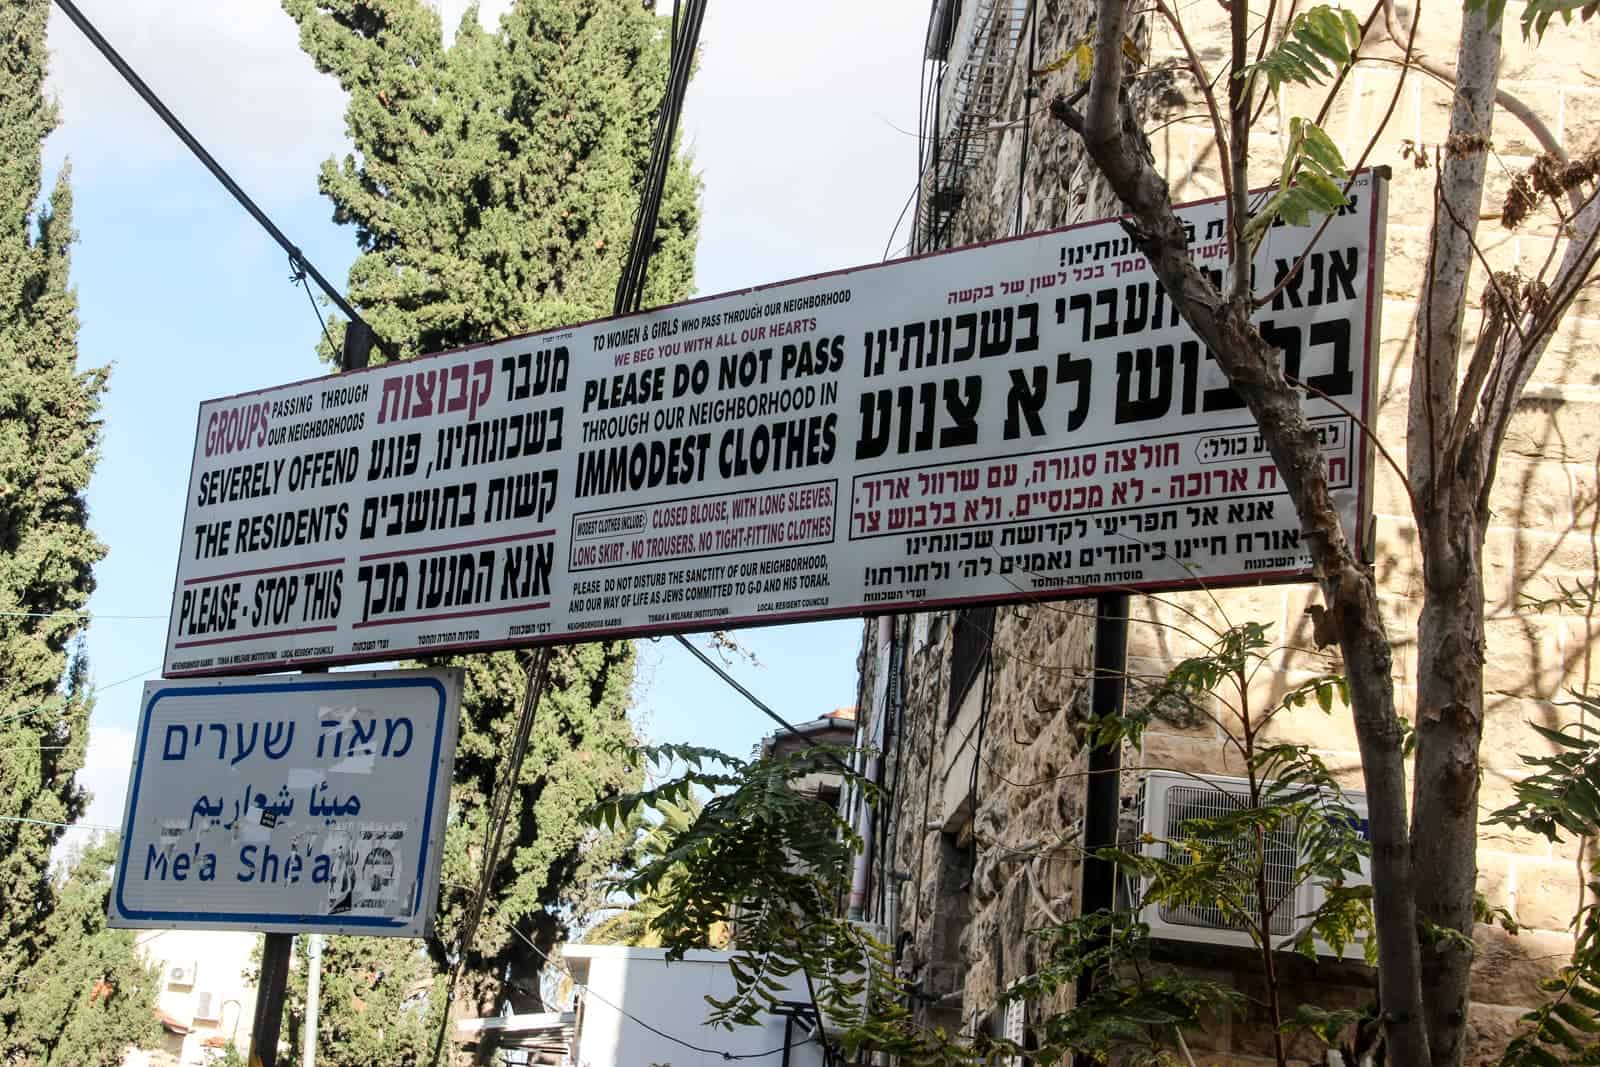 A sign in an Orthadox Jewish neighbourhood in Jerusalem stating "Please do not pass through our neighbourhood in Immodest Clothes" and other statements in Hebrew